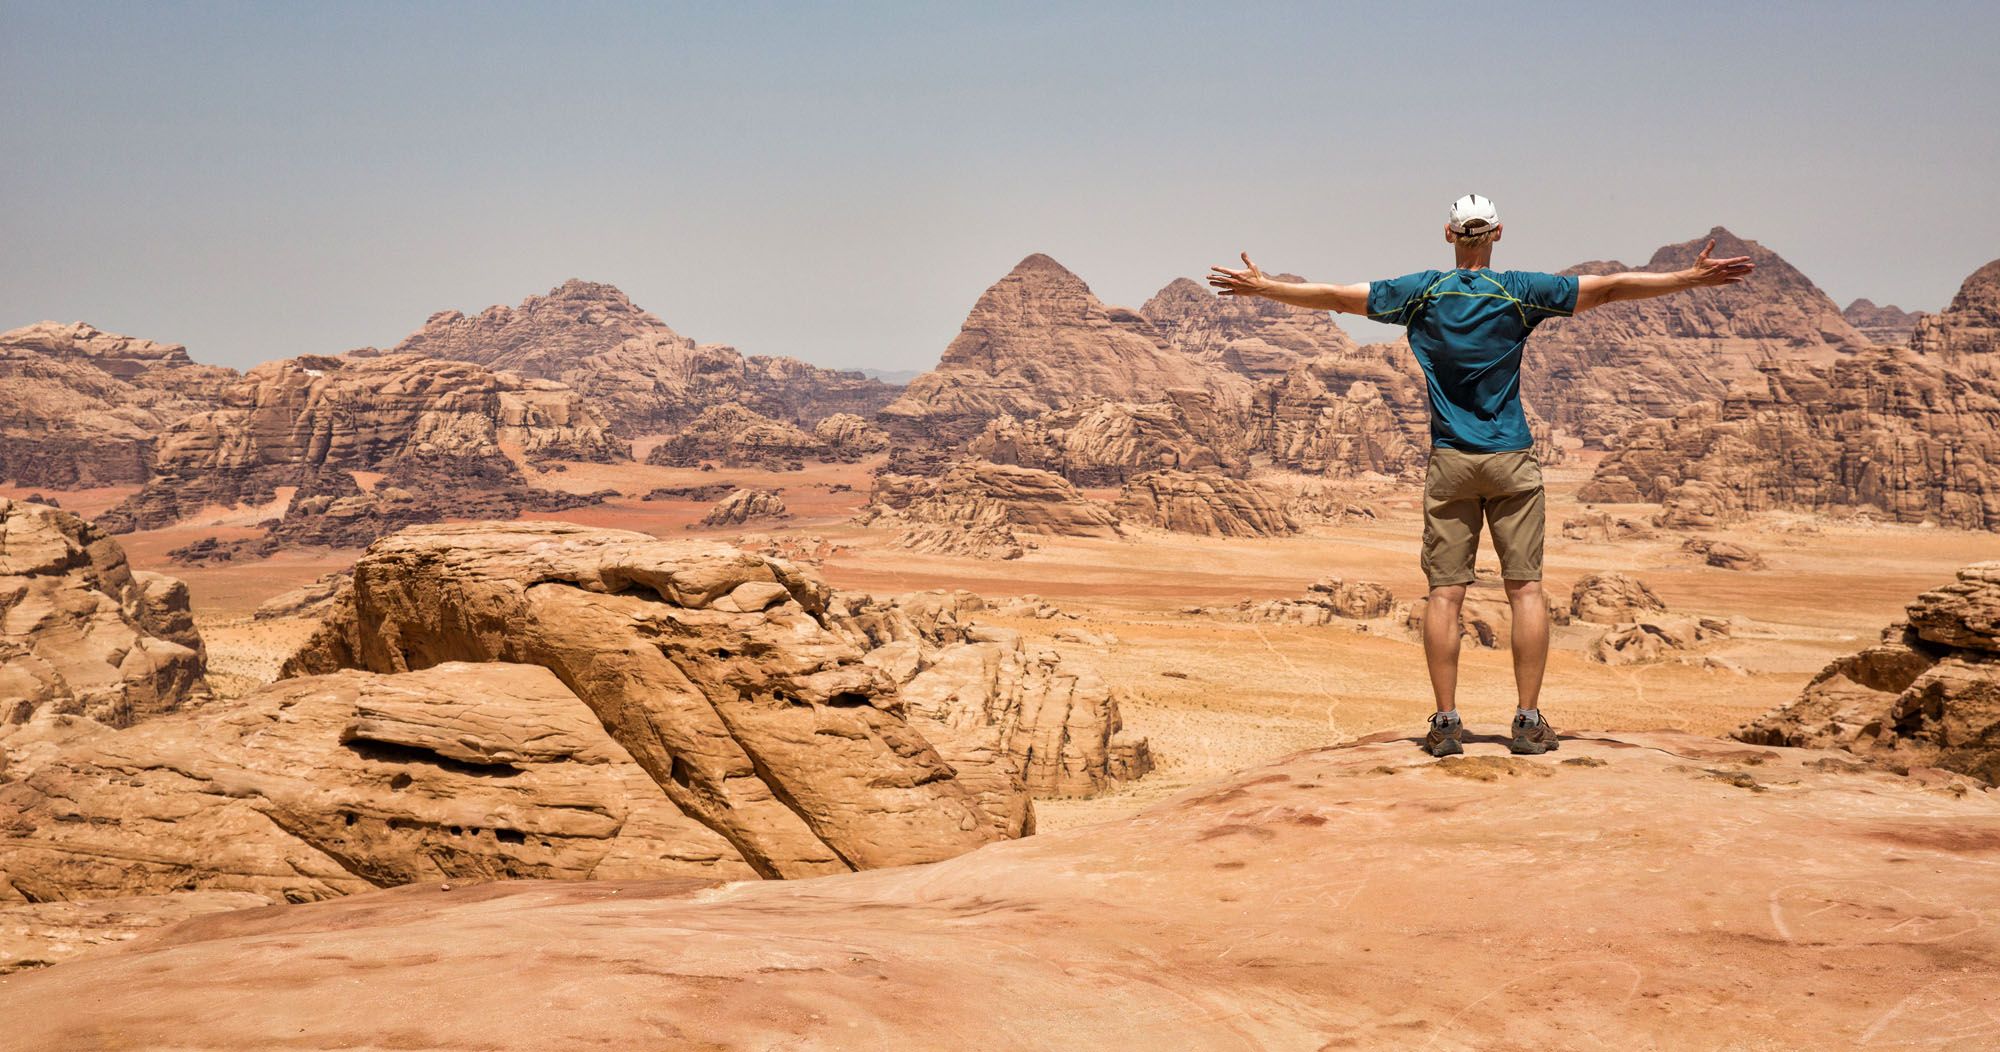 Featured image for “Journey Through the Wadi Rum Desert in Photos”